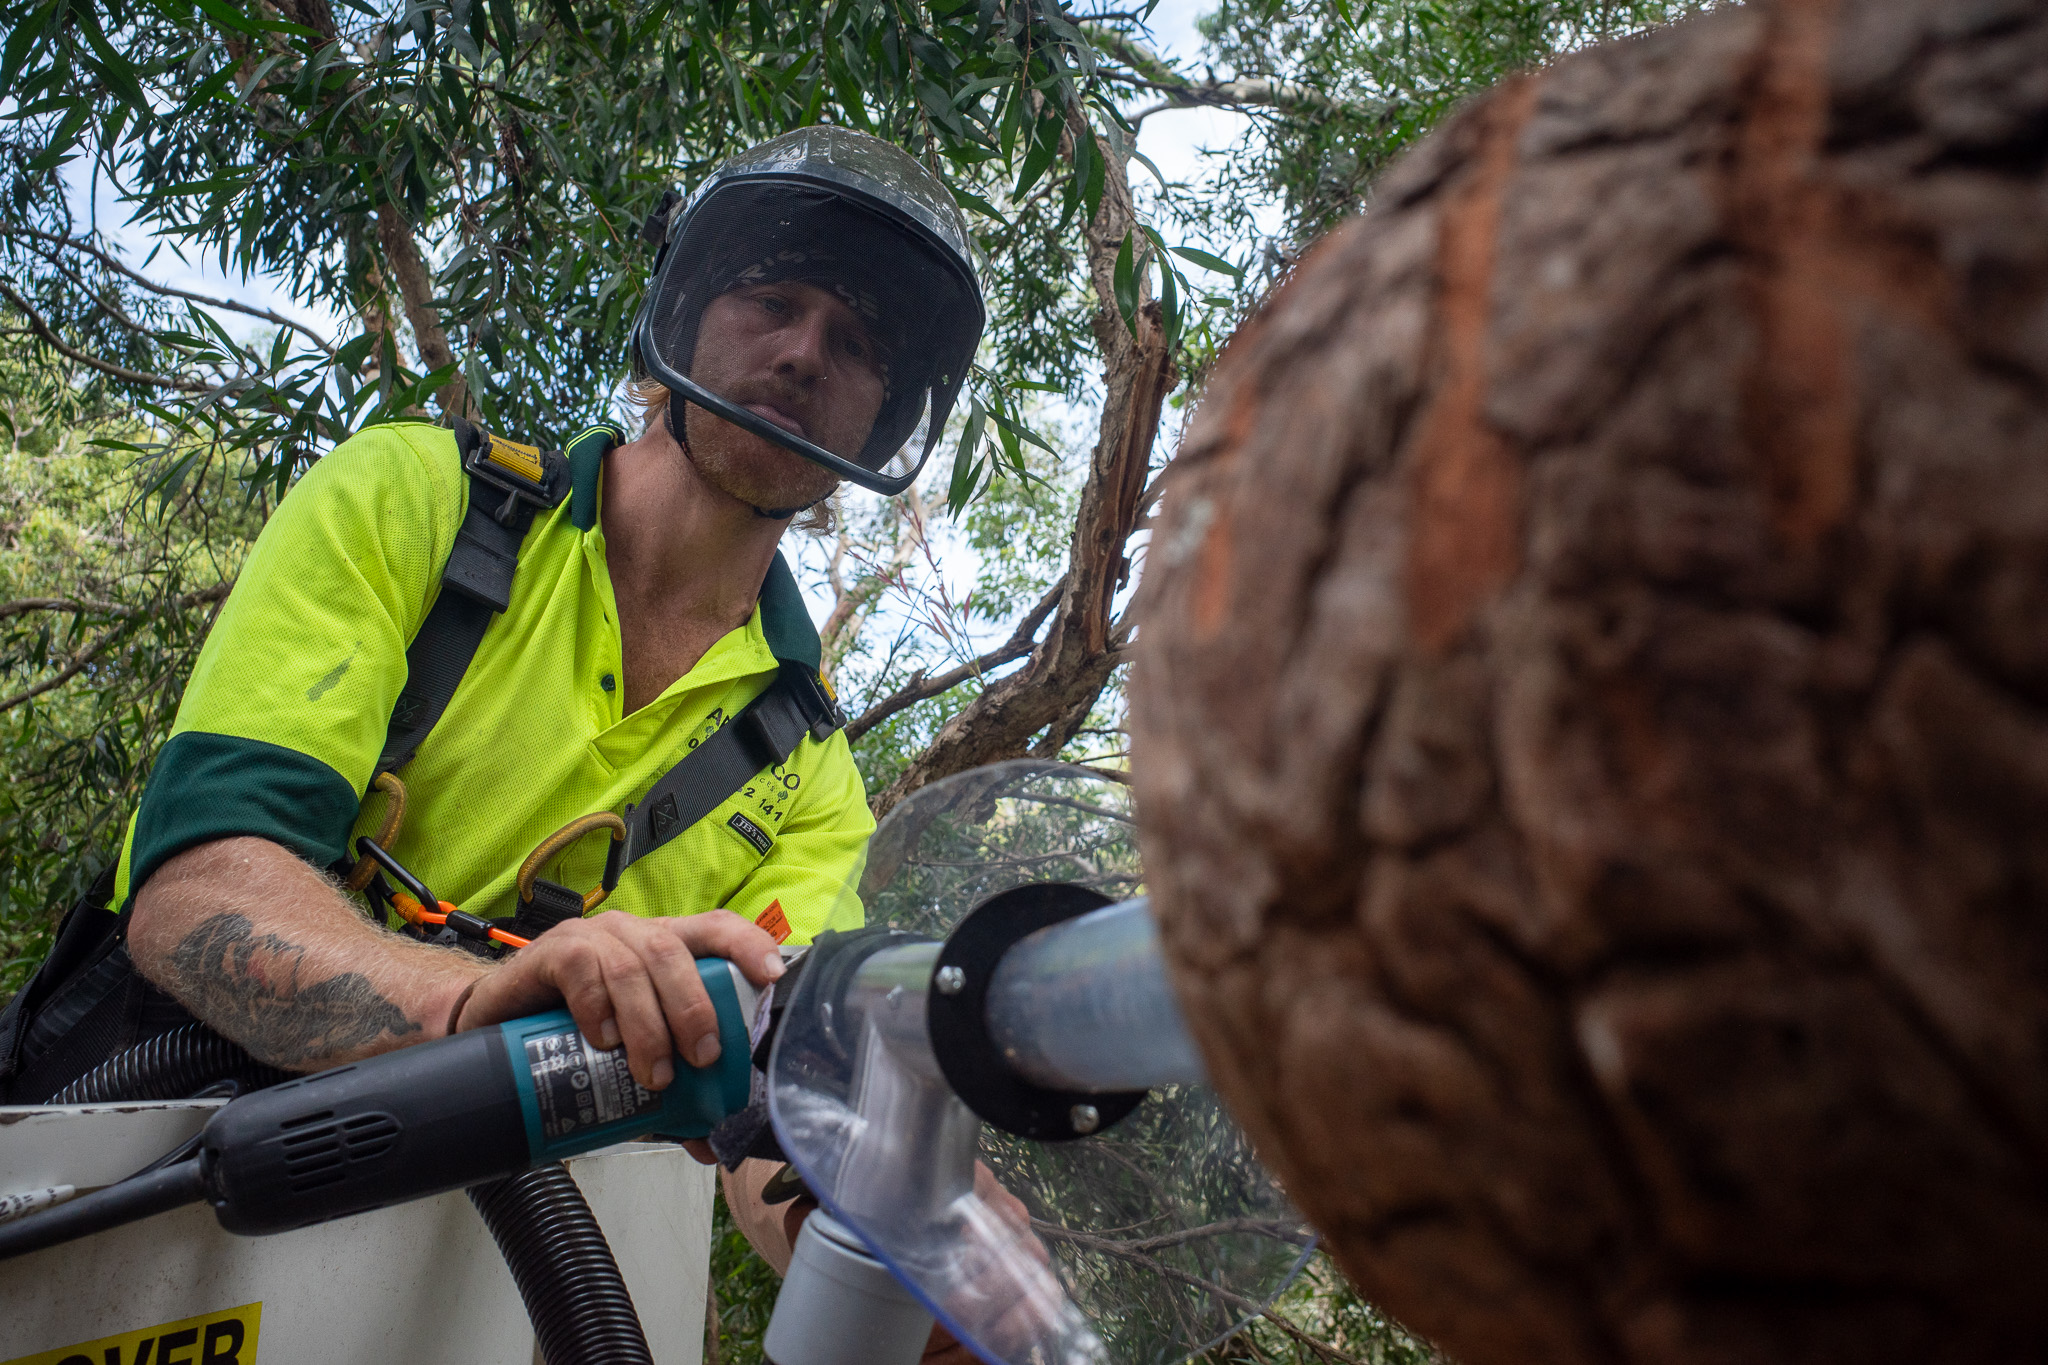 Woollahra Council begins creating tree hollows in effort to save wildlife habitats